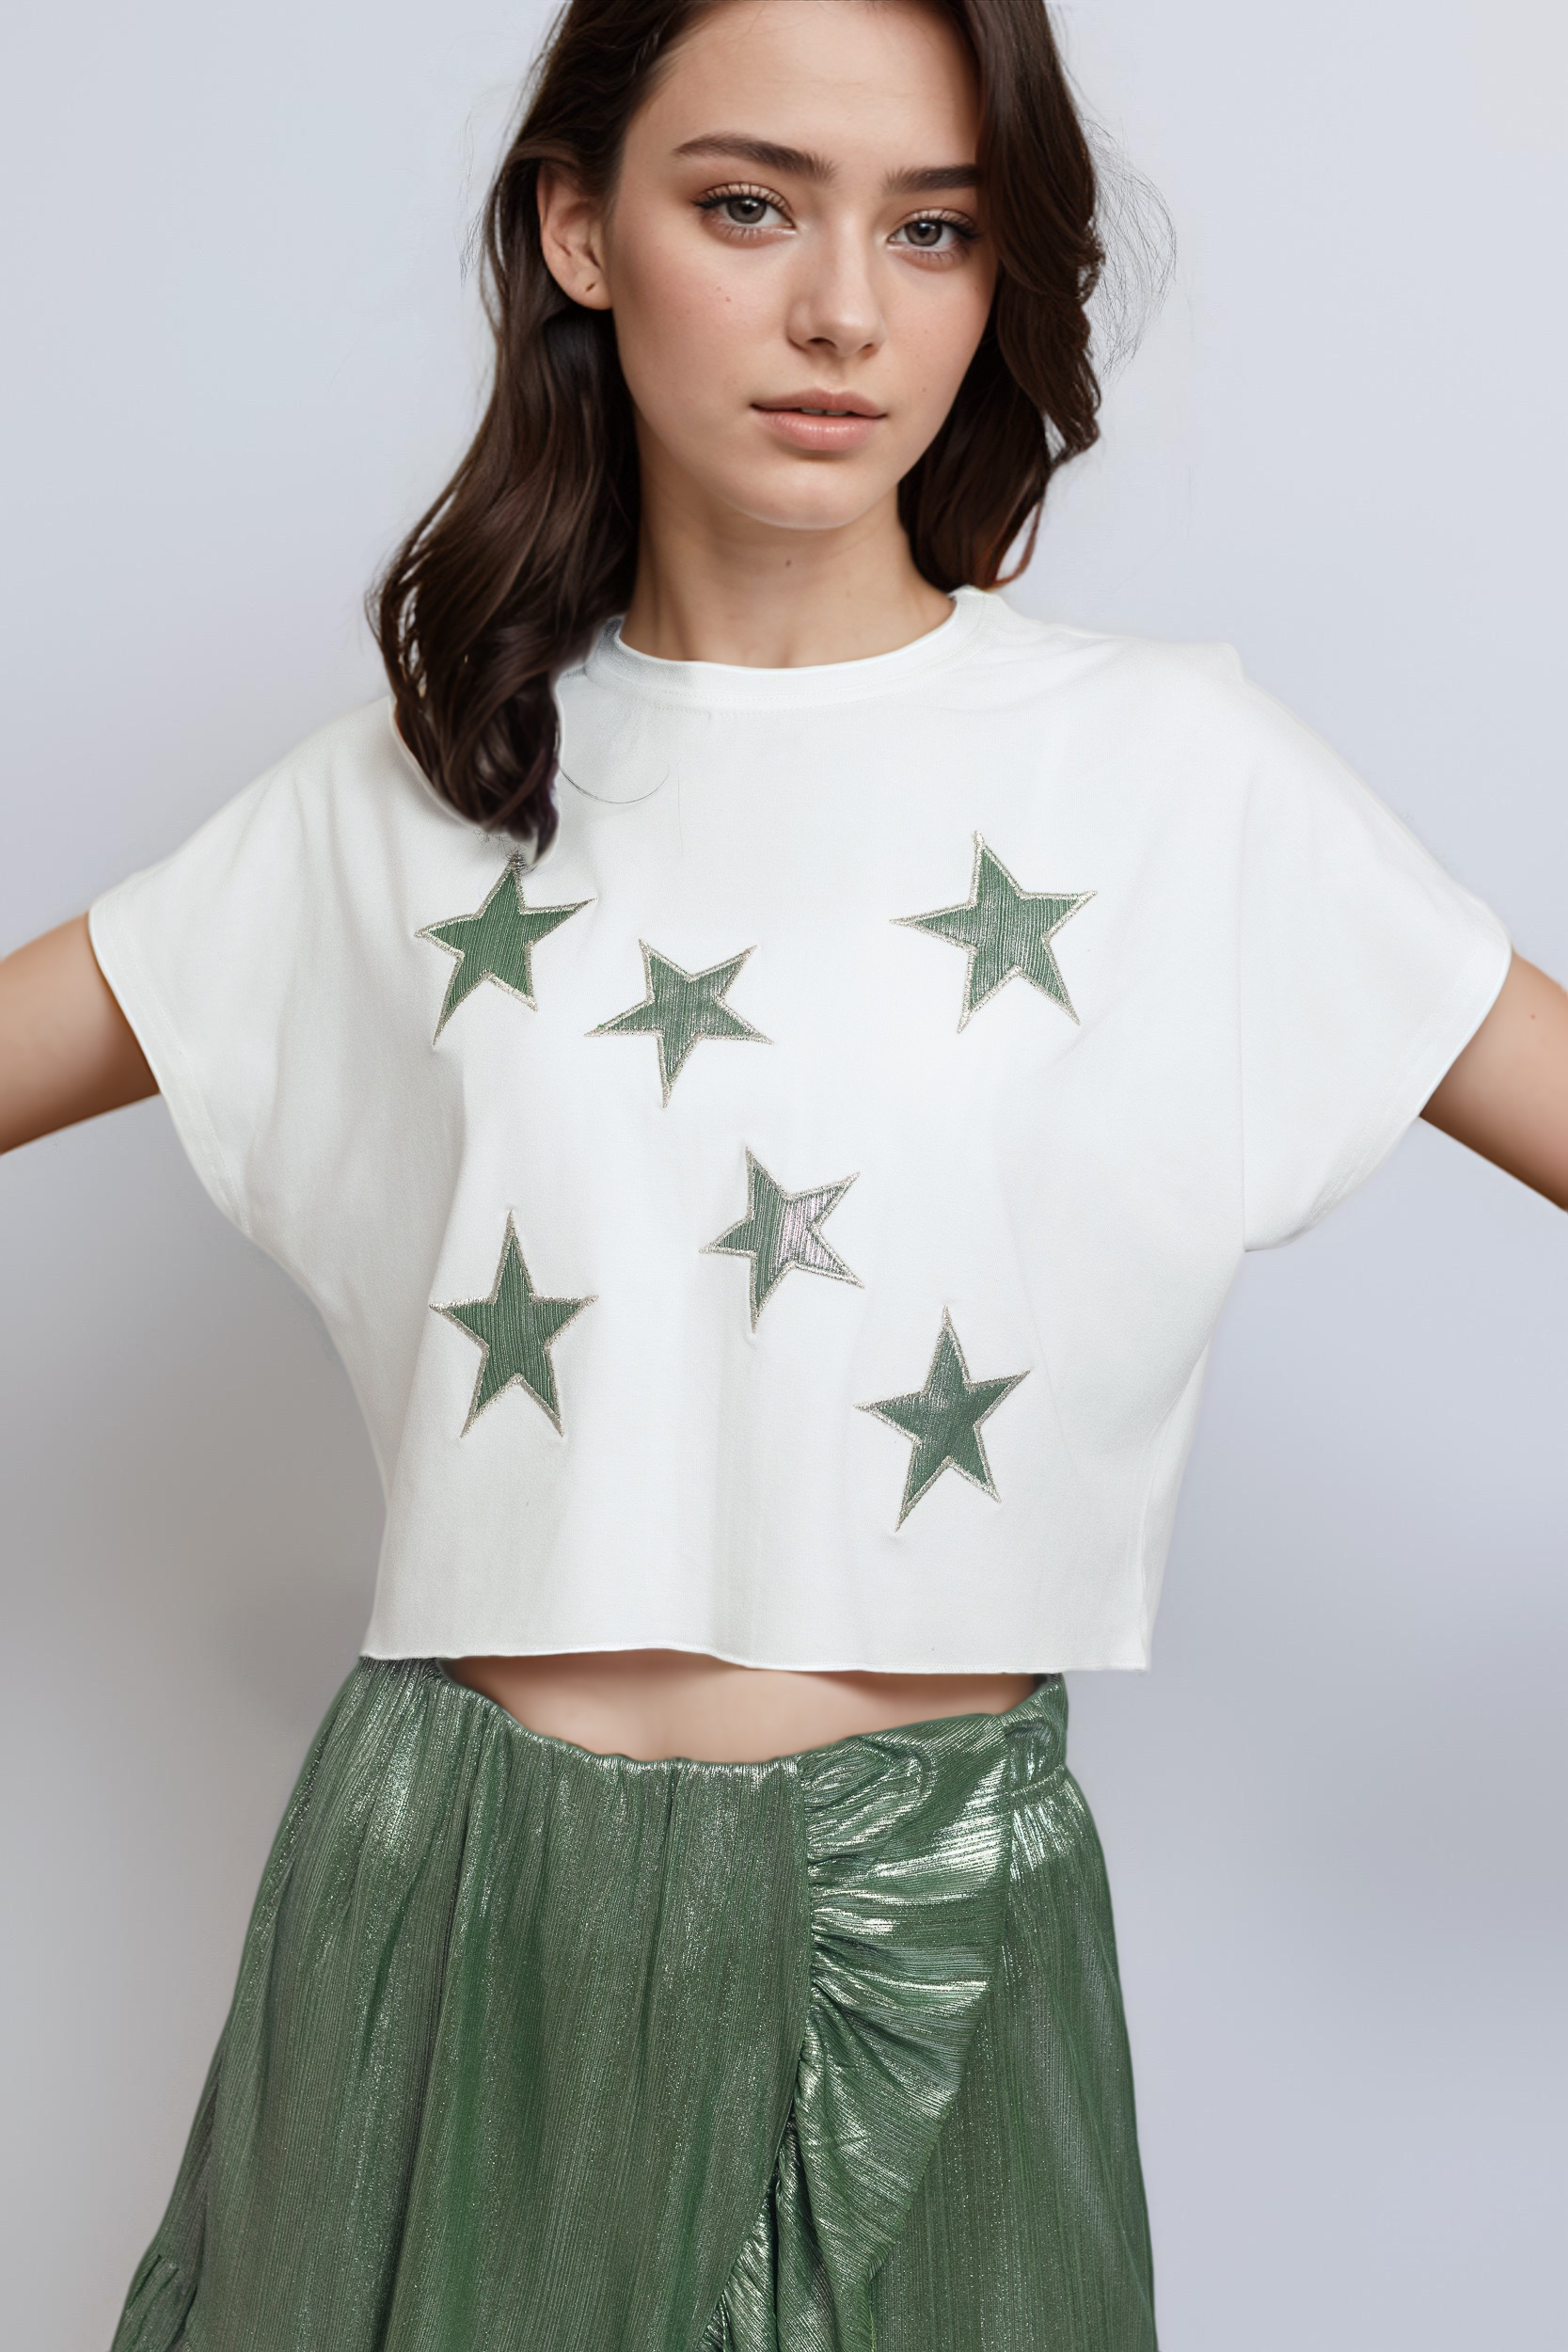 Shiny Star Top For Women - Off White